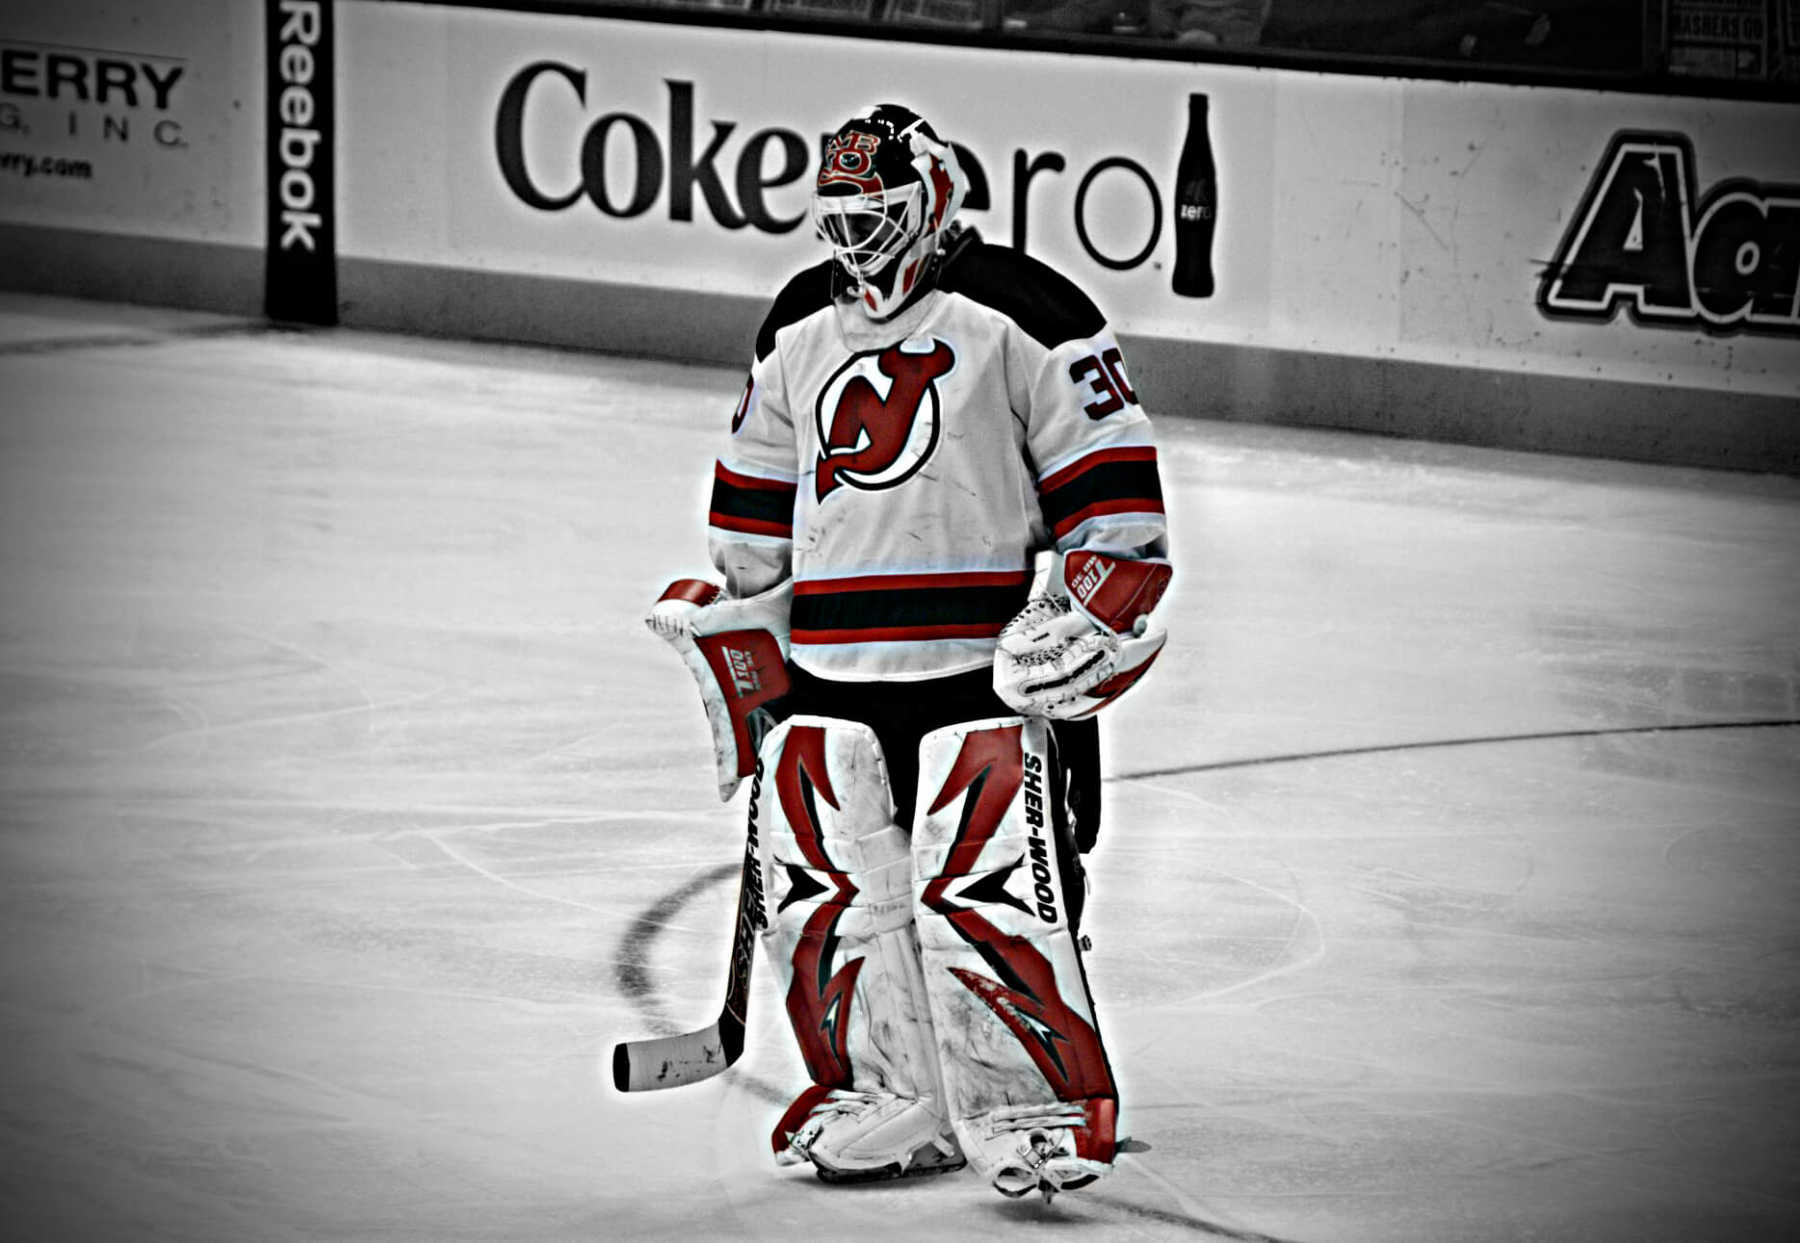 Where does Devils legend Martin Brodeur rank among NHL's all-time